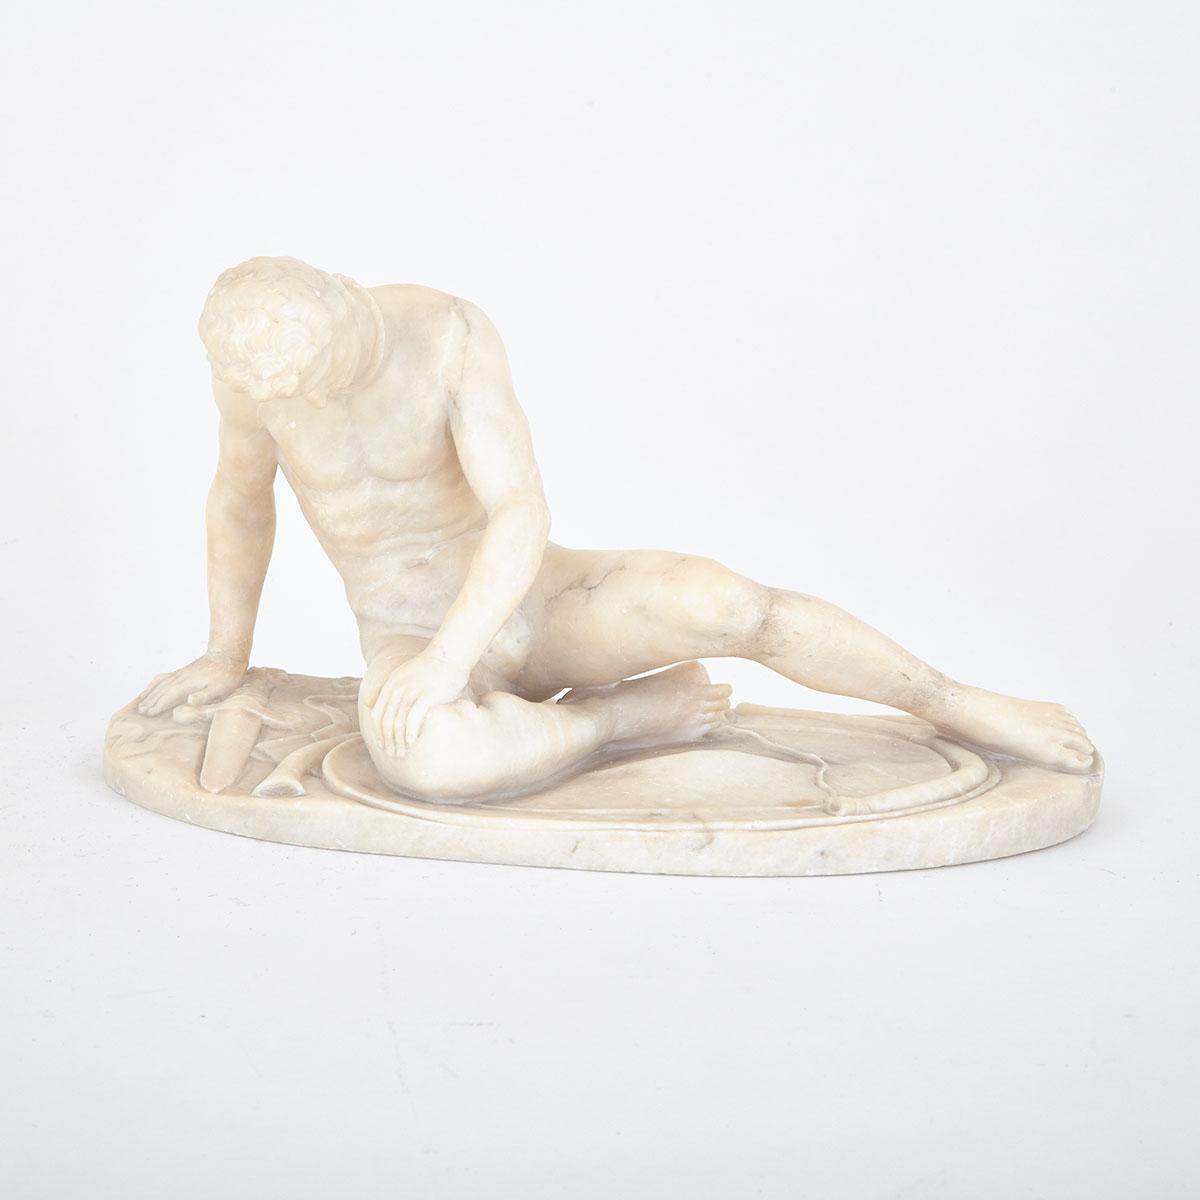 Italian ‘Grand Tour’ White Marble Model of The Dying Gaul, After the Antique, 19th century